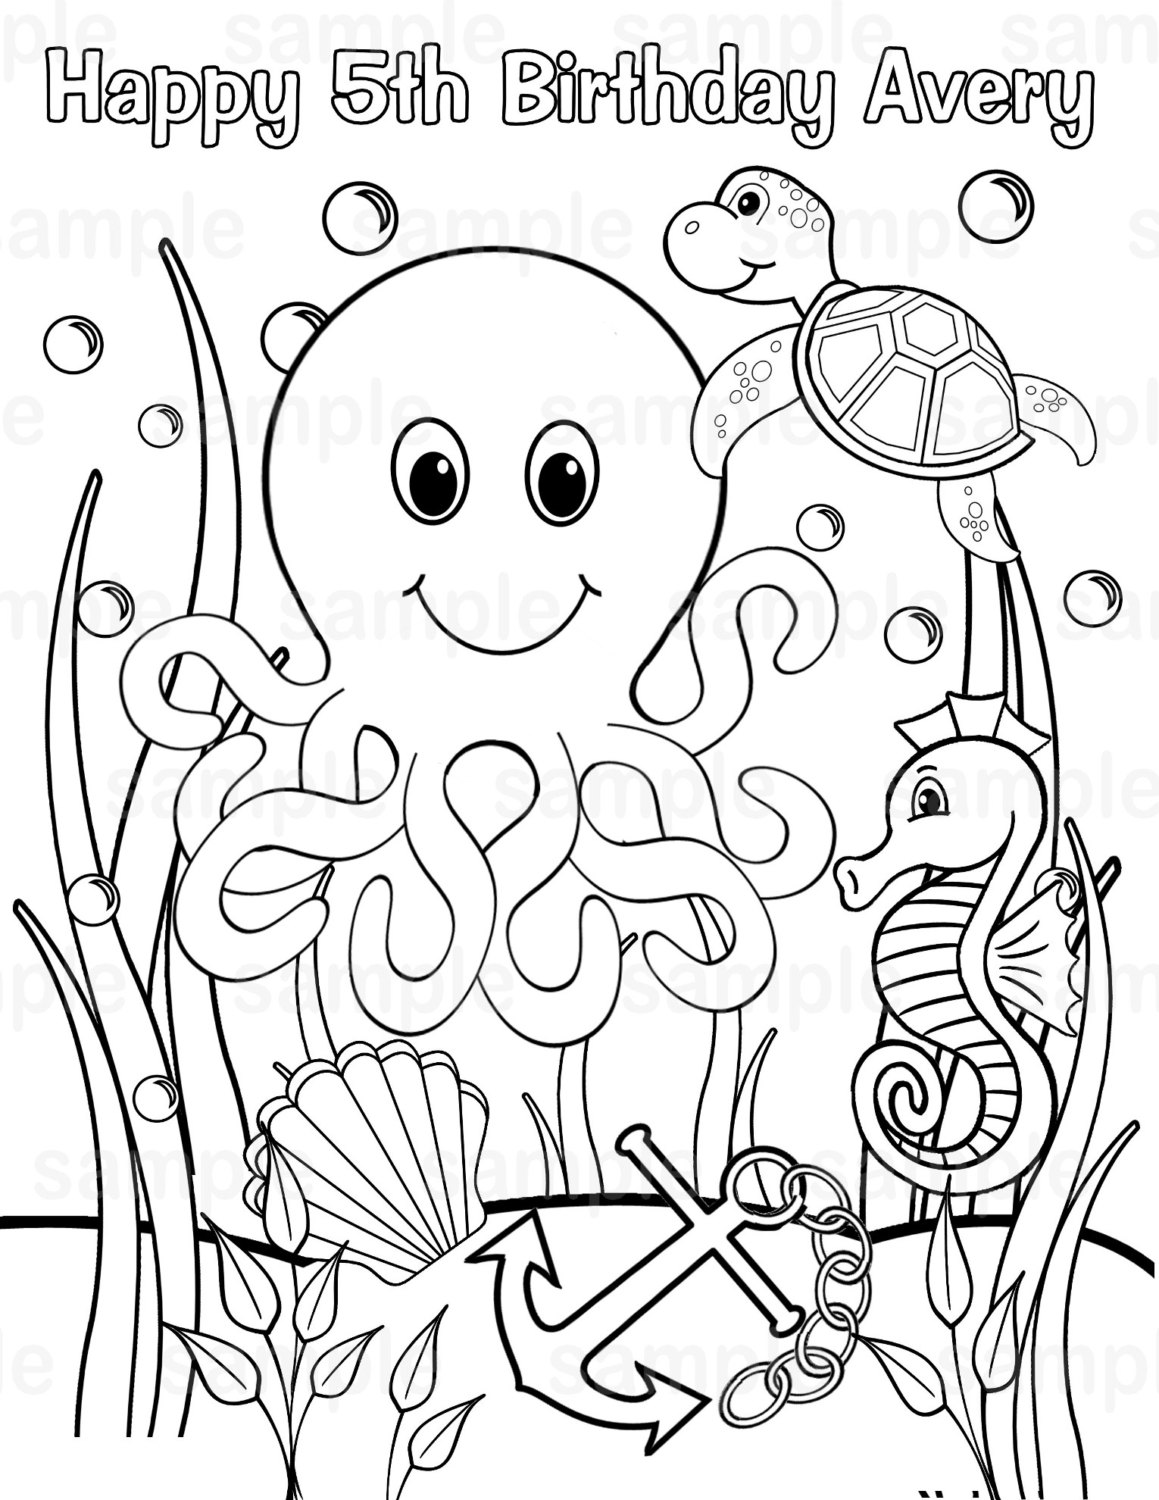 under the ocean printable coloring pages - photo #4